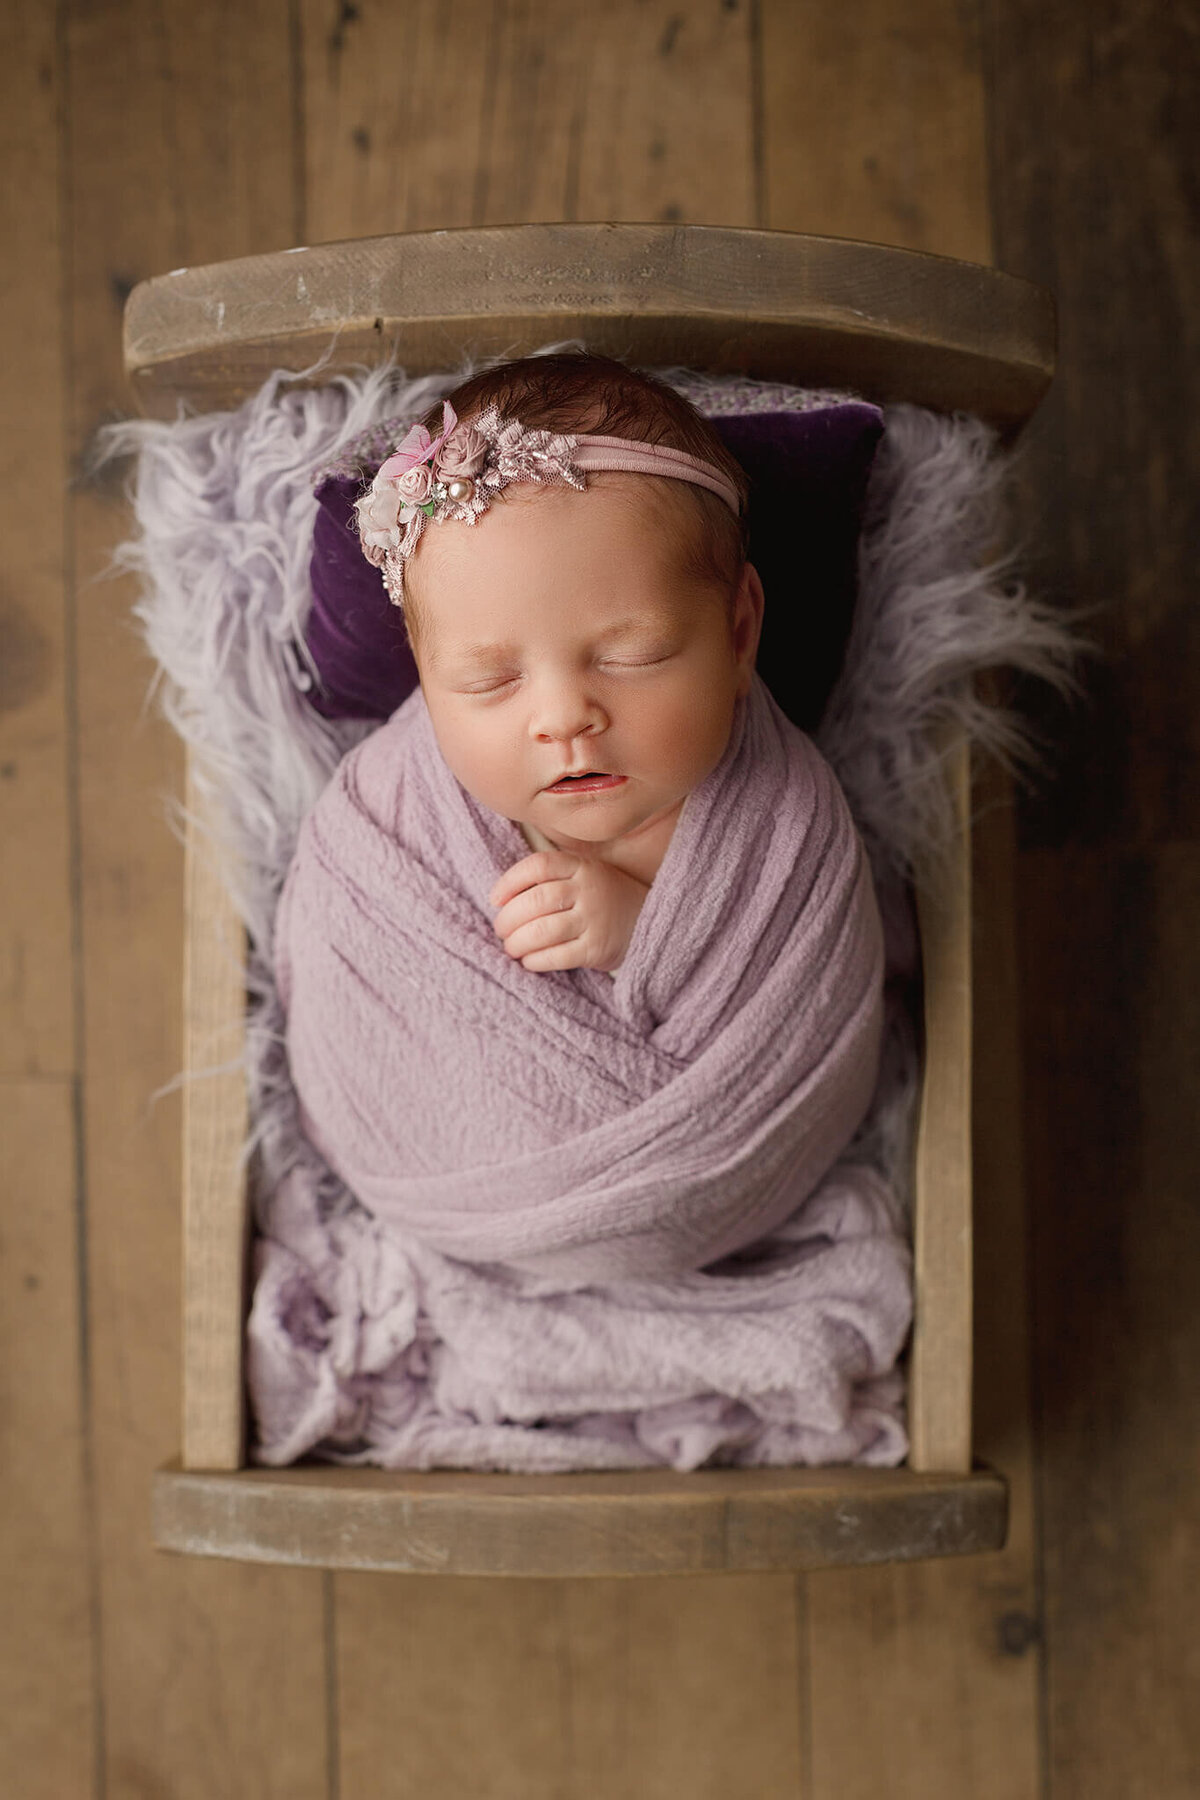 baby girl wrapped in purple, sleeping in wooden cradle